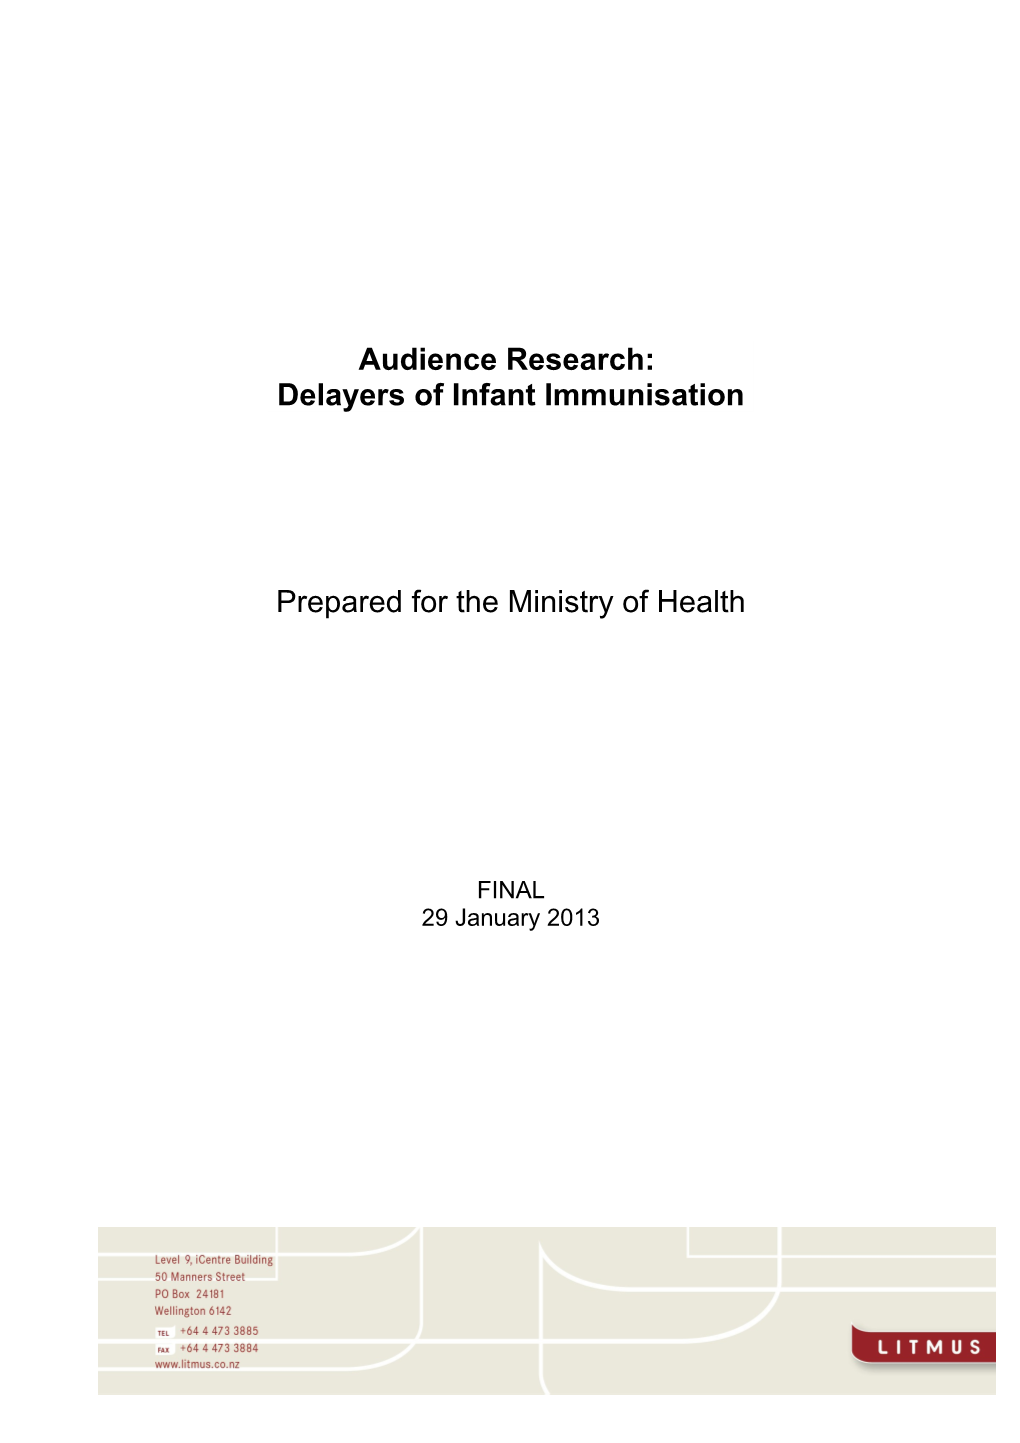 Audience Research: Delayers of Infant Immunisation